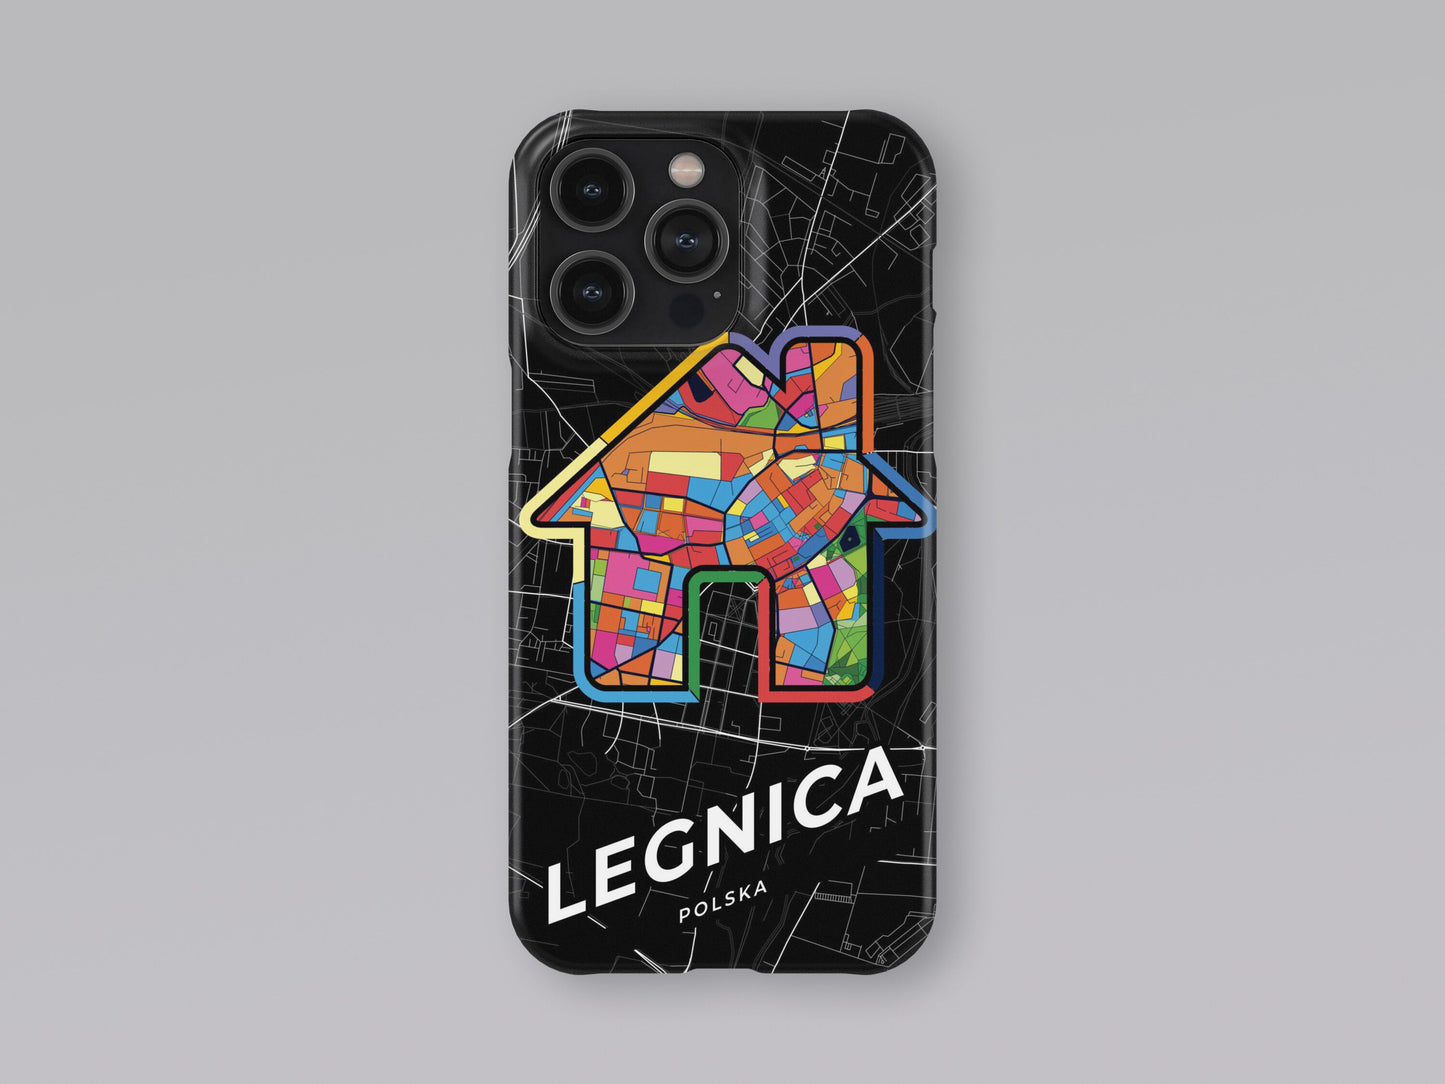 Legnica Poland slim phone case with colorful icon. Birthday, wedding or housewarming gift. Couple match cases. 3